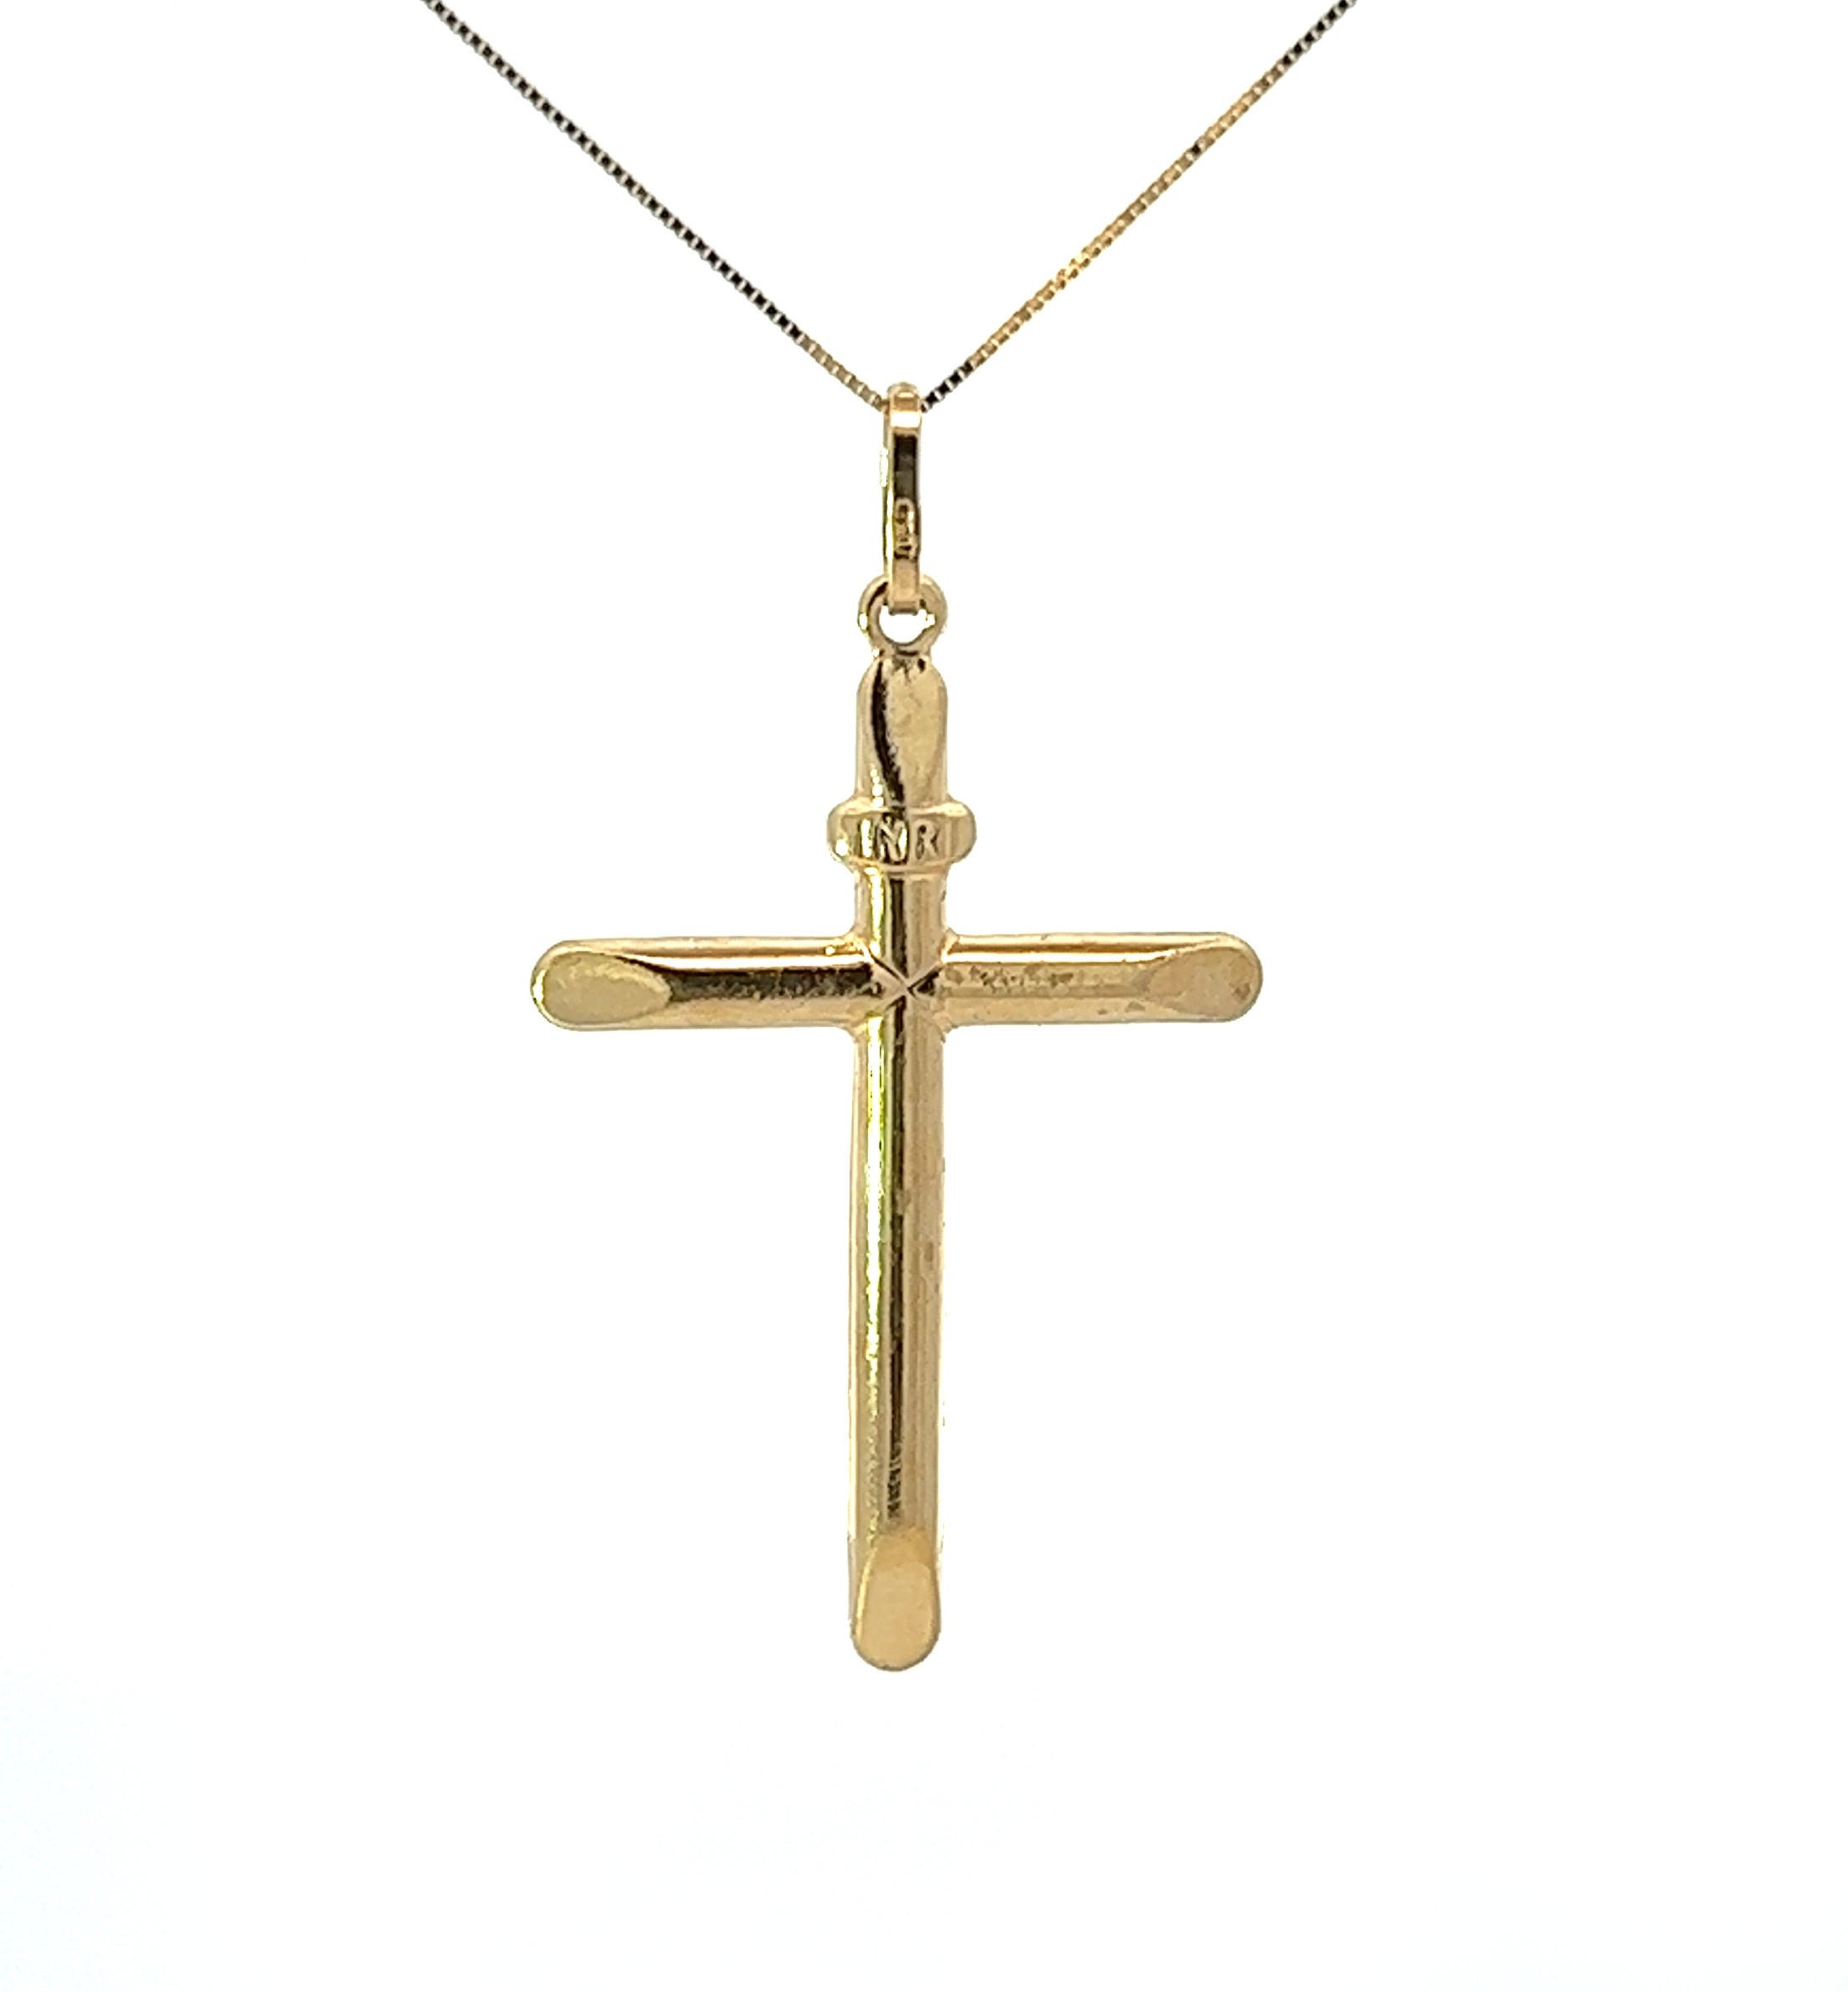 18ct Gold Over Sterling Silver Cross Pendant Necklace. - Etsy